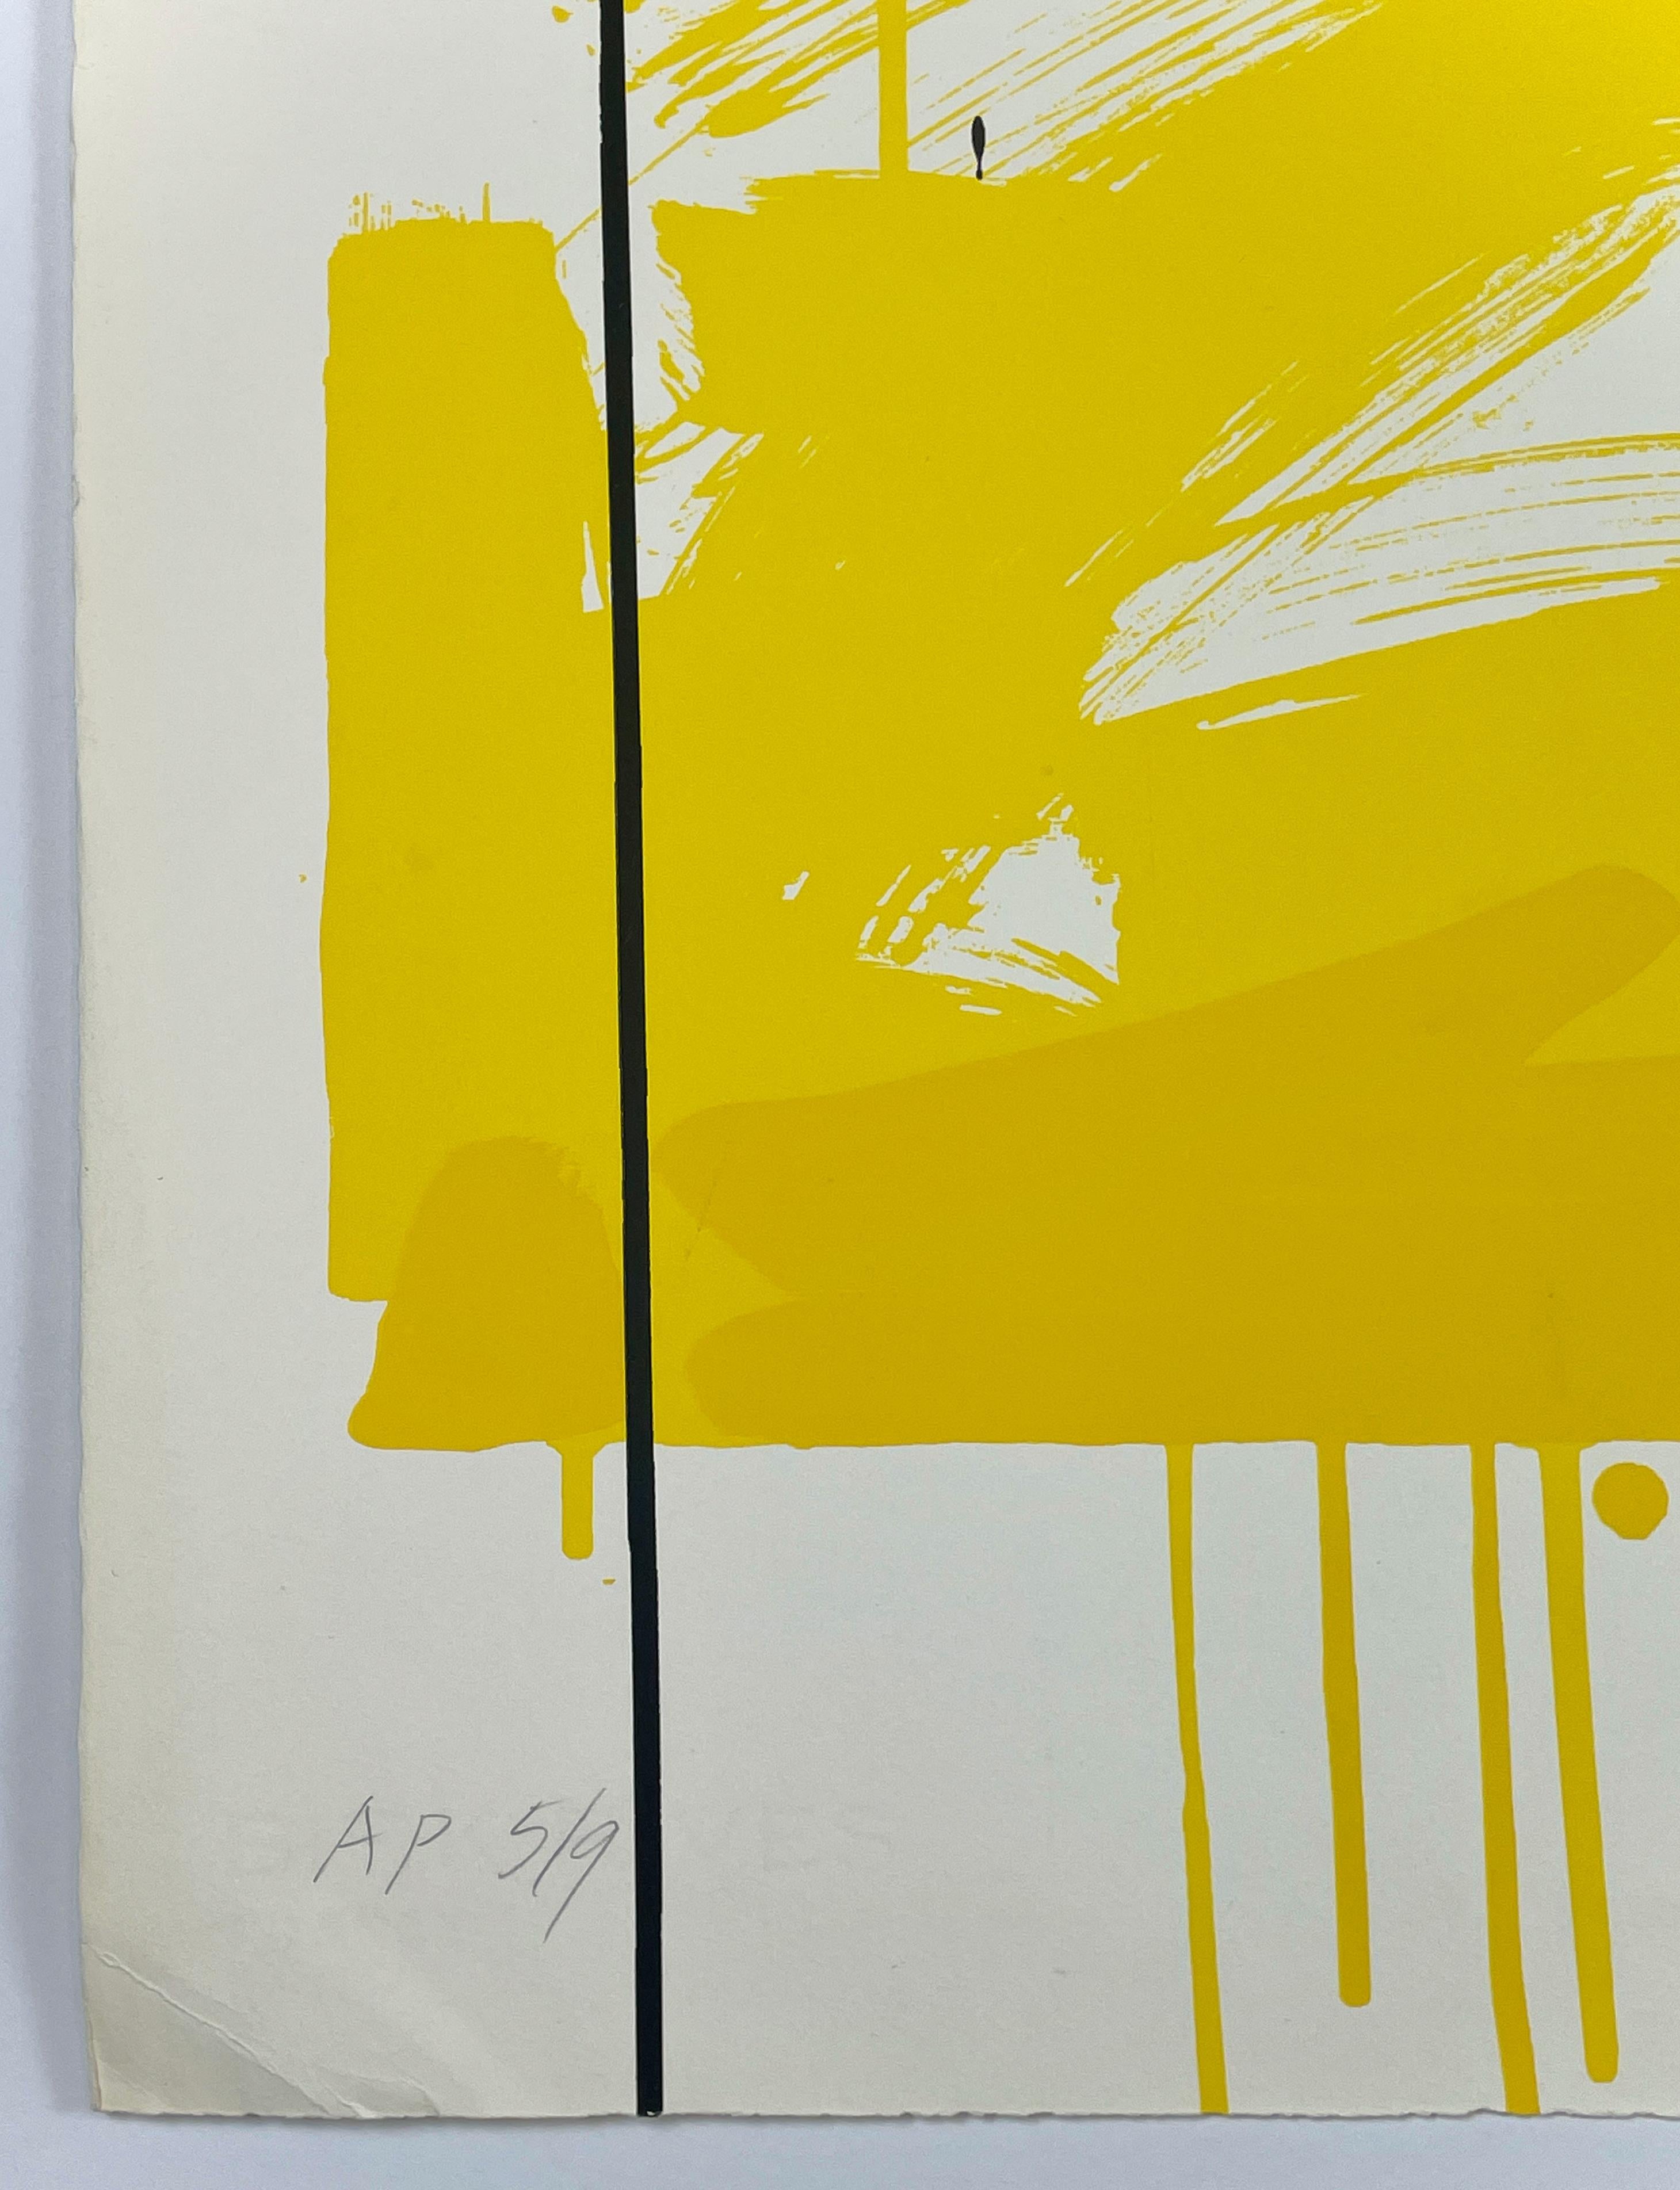 A dynamic neon-yellow and black Mark Lancaster screen print combining calligraphic paint strokes, paint drips, and smooth, graphic yellow gradients characteristic of the artist's most well known works such as Cambridge Green (1968). Mark Lancaster